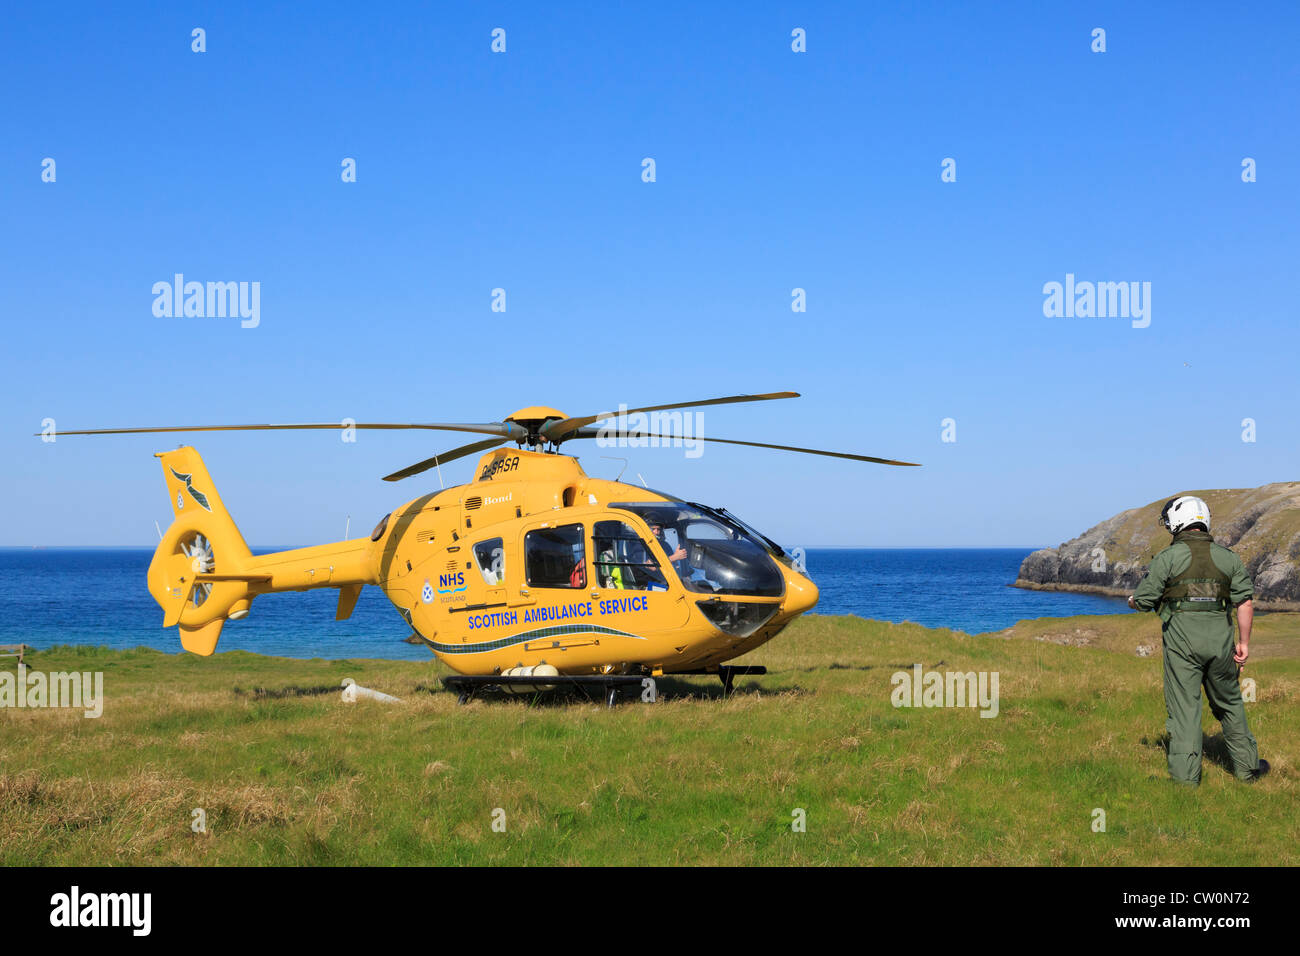 Scottish Air Ambulance Service Helicopter preparing to take off after a rescue mission on remote North West Highlands coast. UK Stock Photo